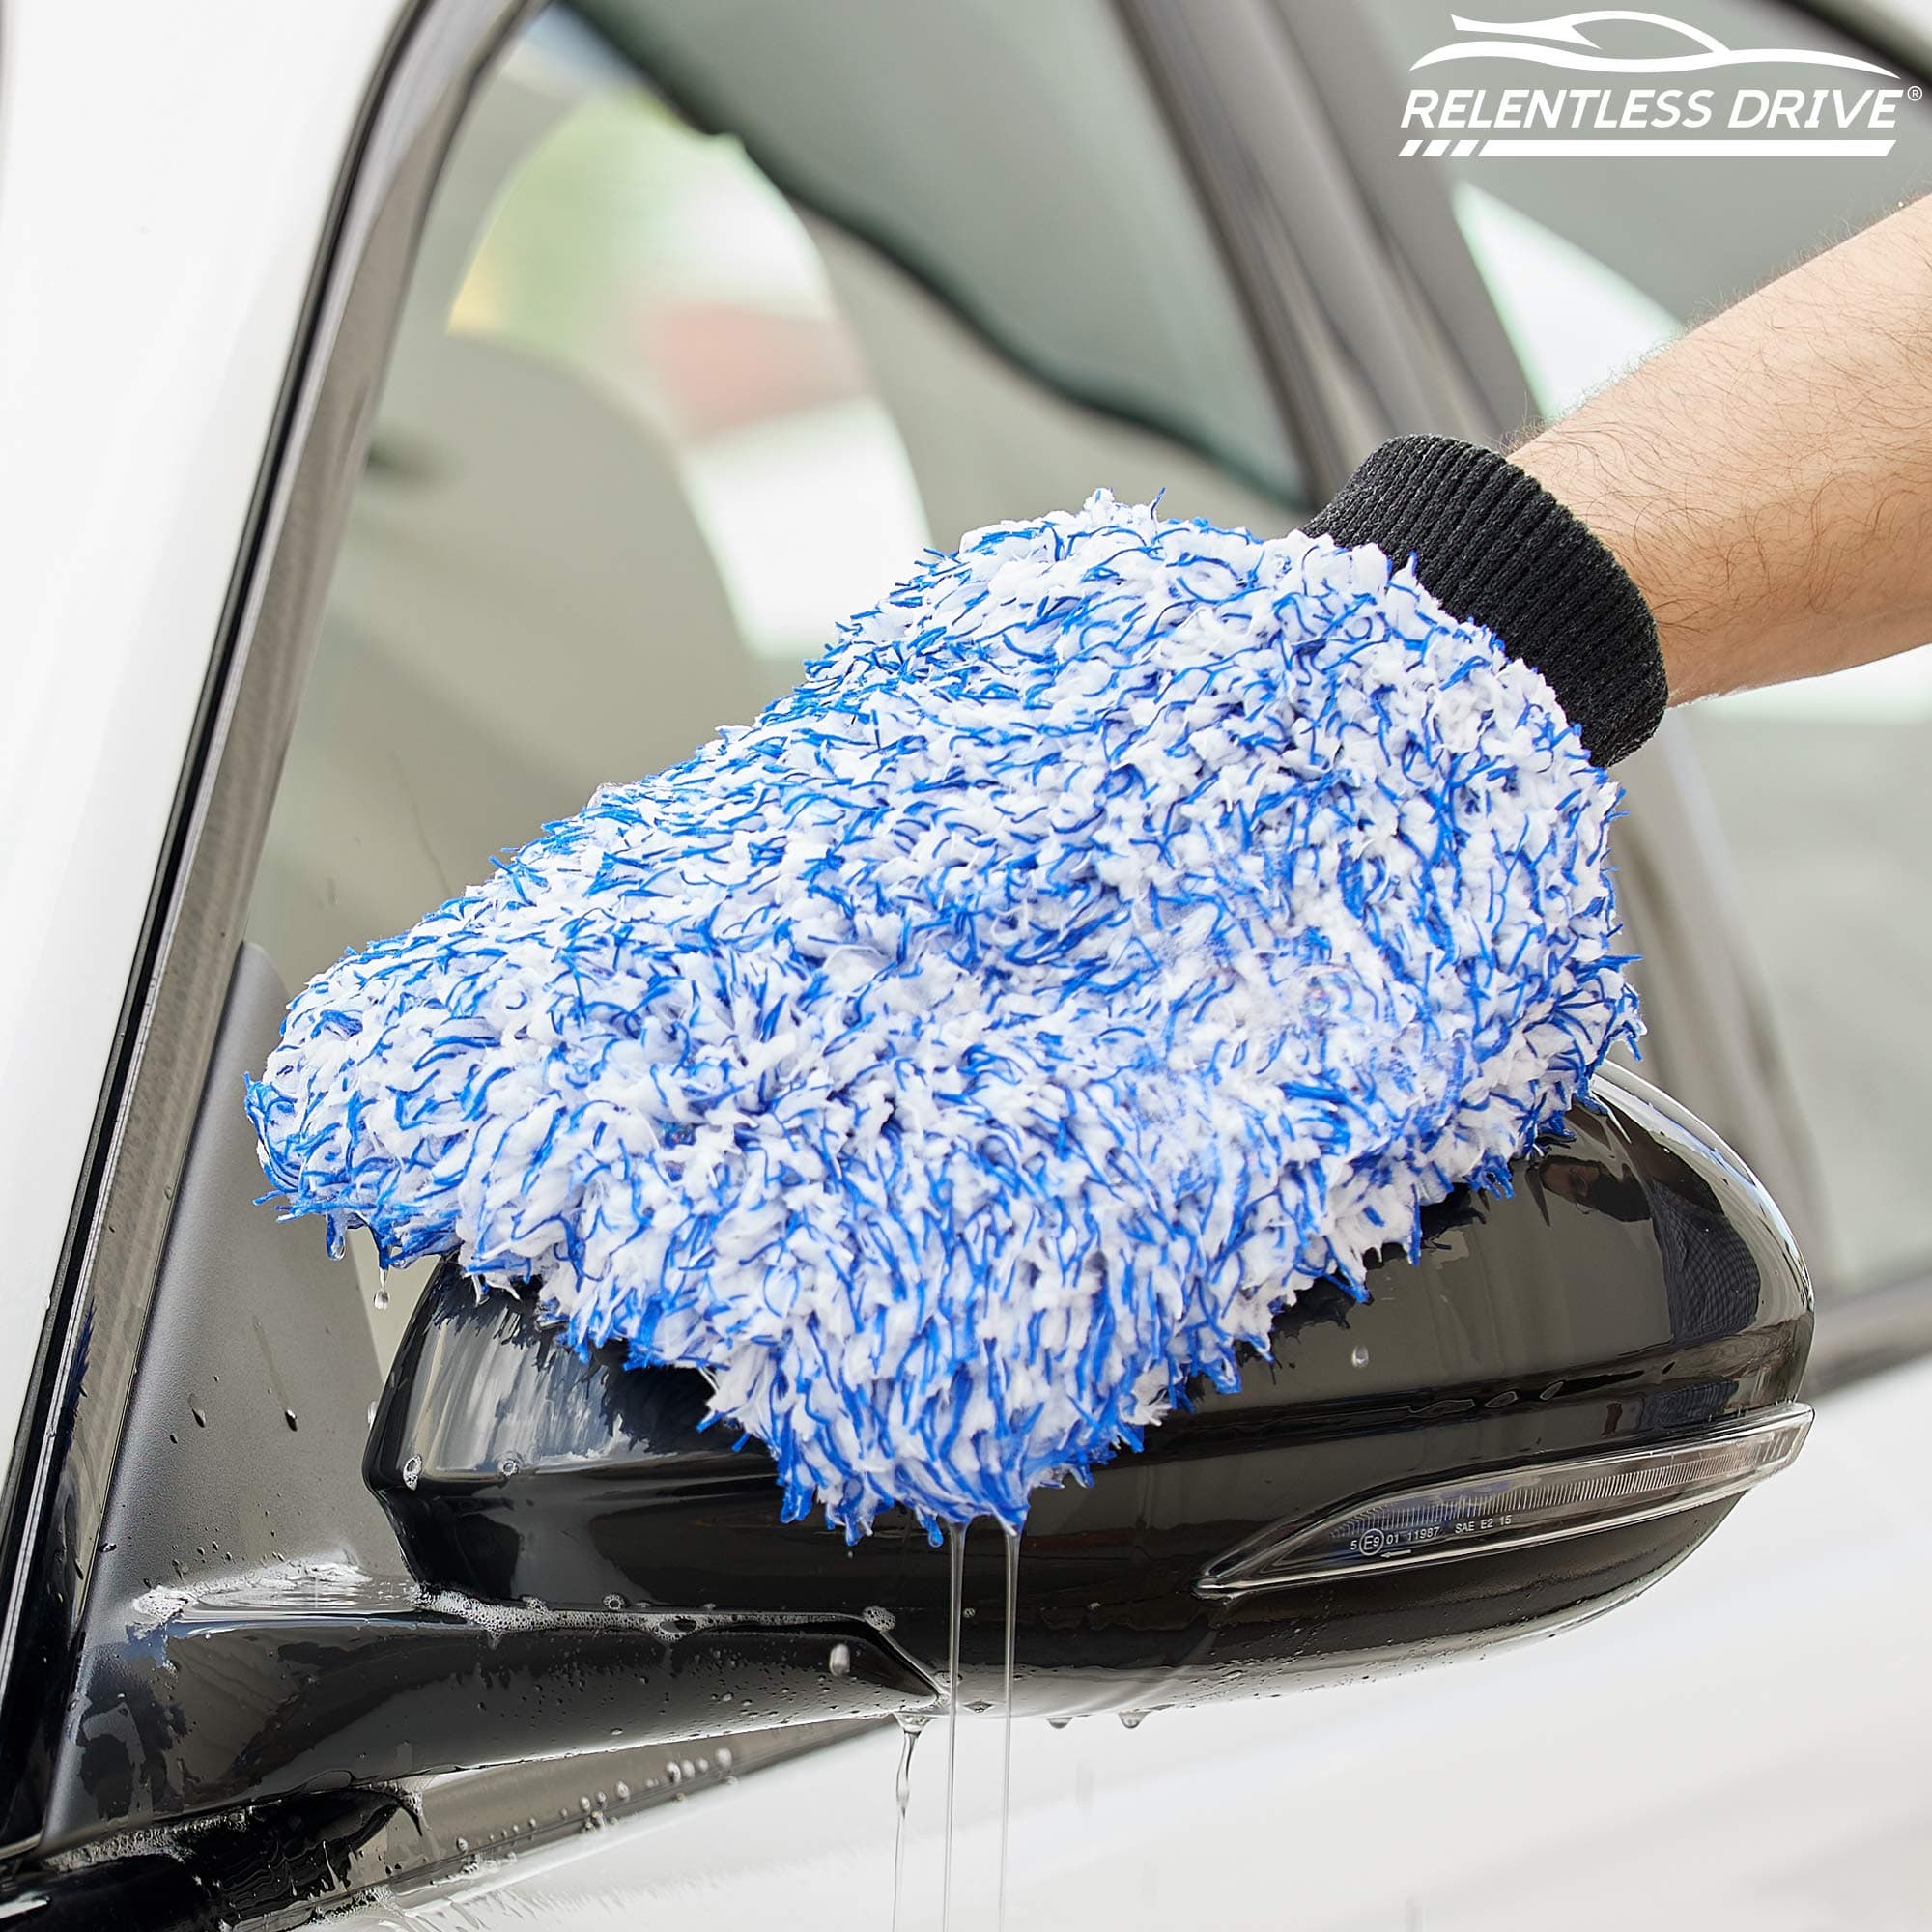 Car Cleaning Wash Mitt, Car Wash Mitt Car Cleaning Kit, Car Accessories  Wash Mitt for Car Washing, Cleaning Supplies Dust Gloves for Cars, Trucks